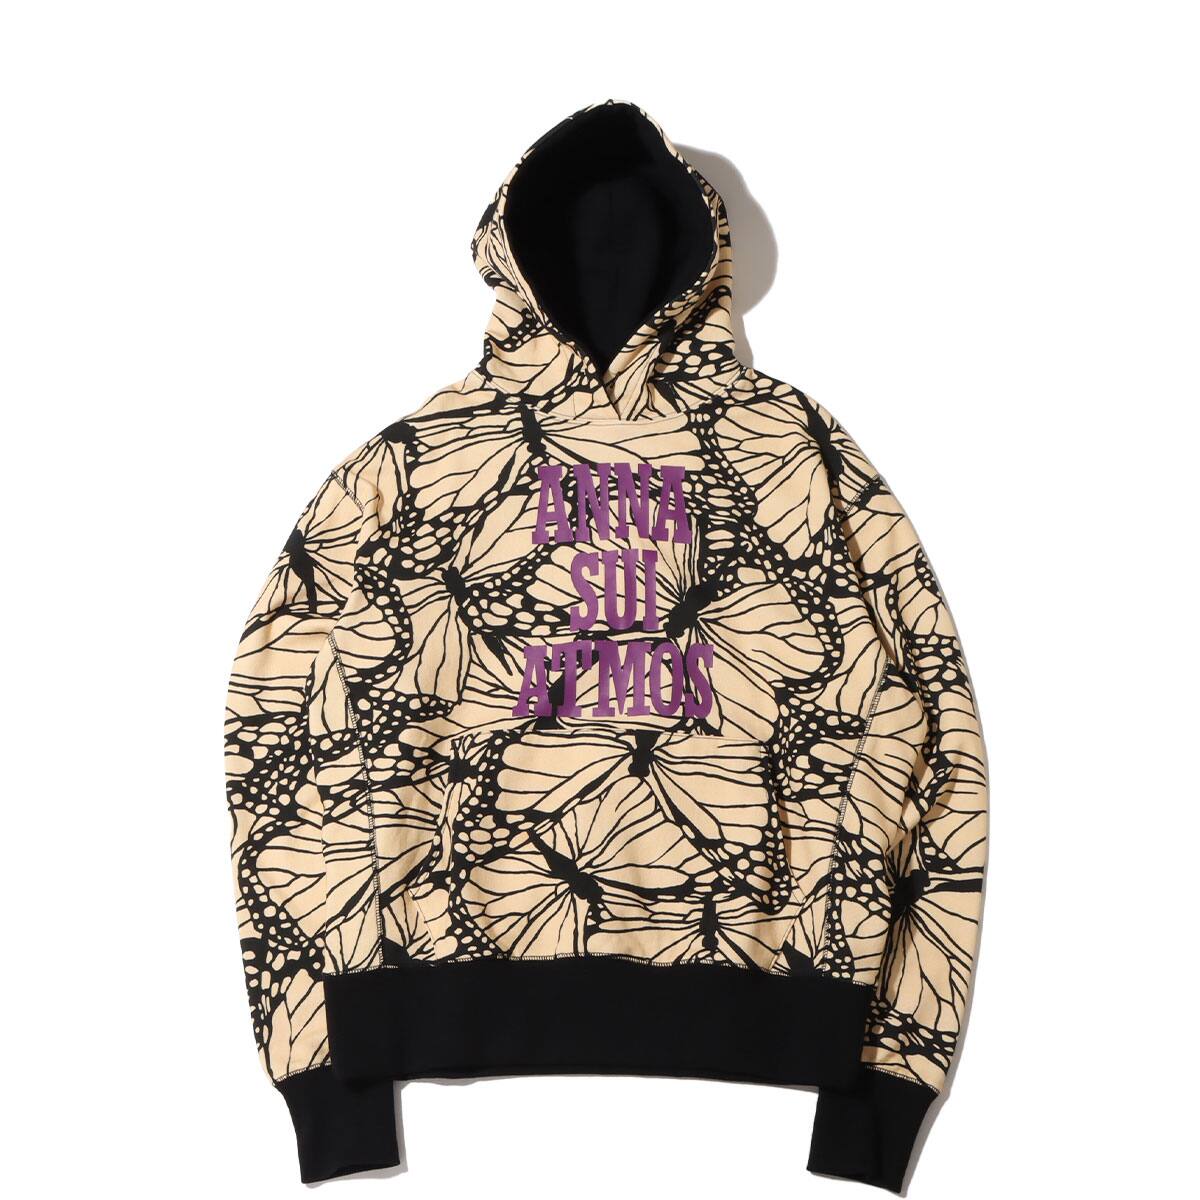 ANNA SUI x ATMOS 総柄 ロゴフーディー BEIGE